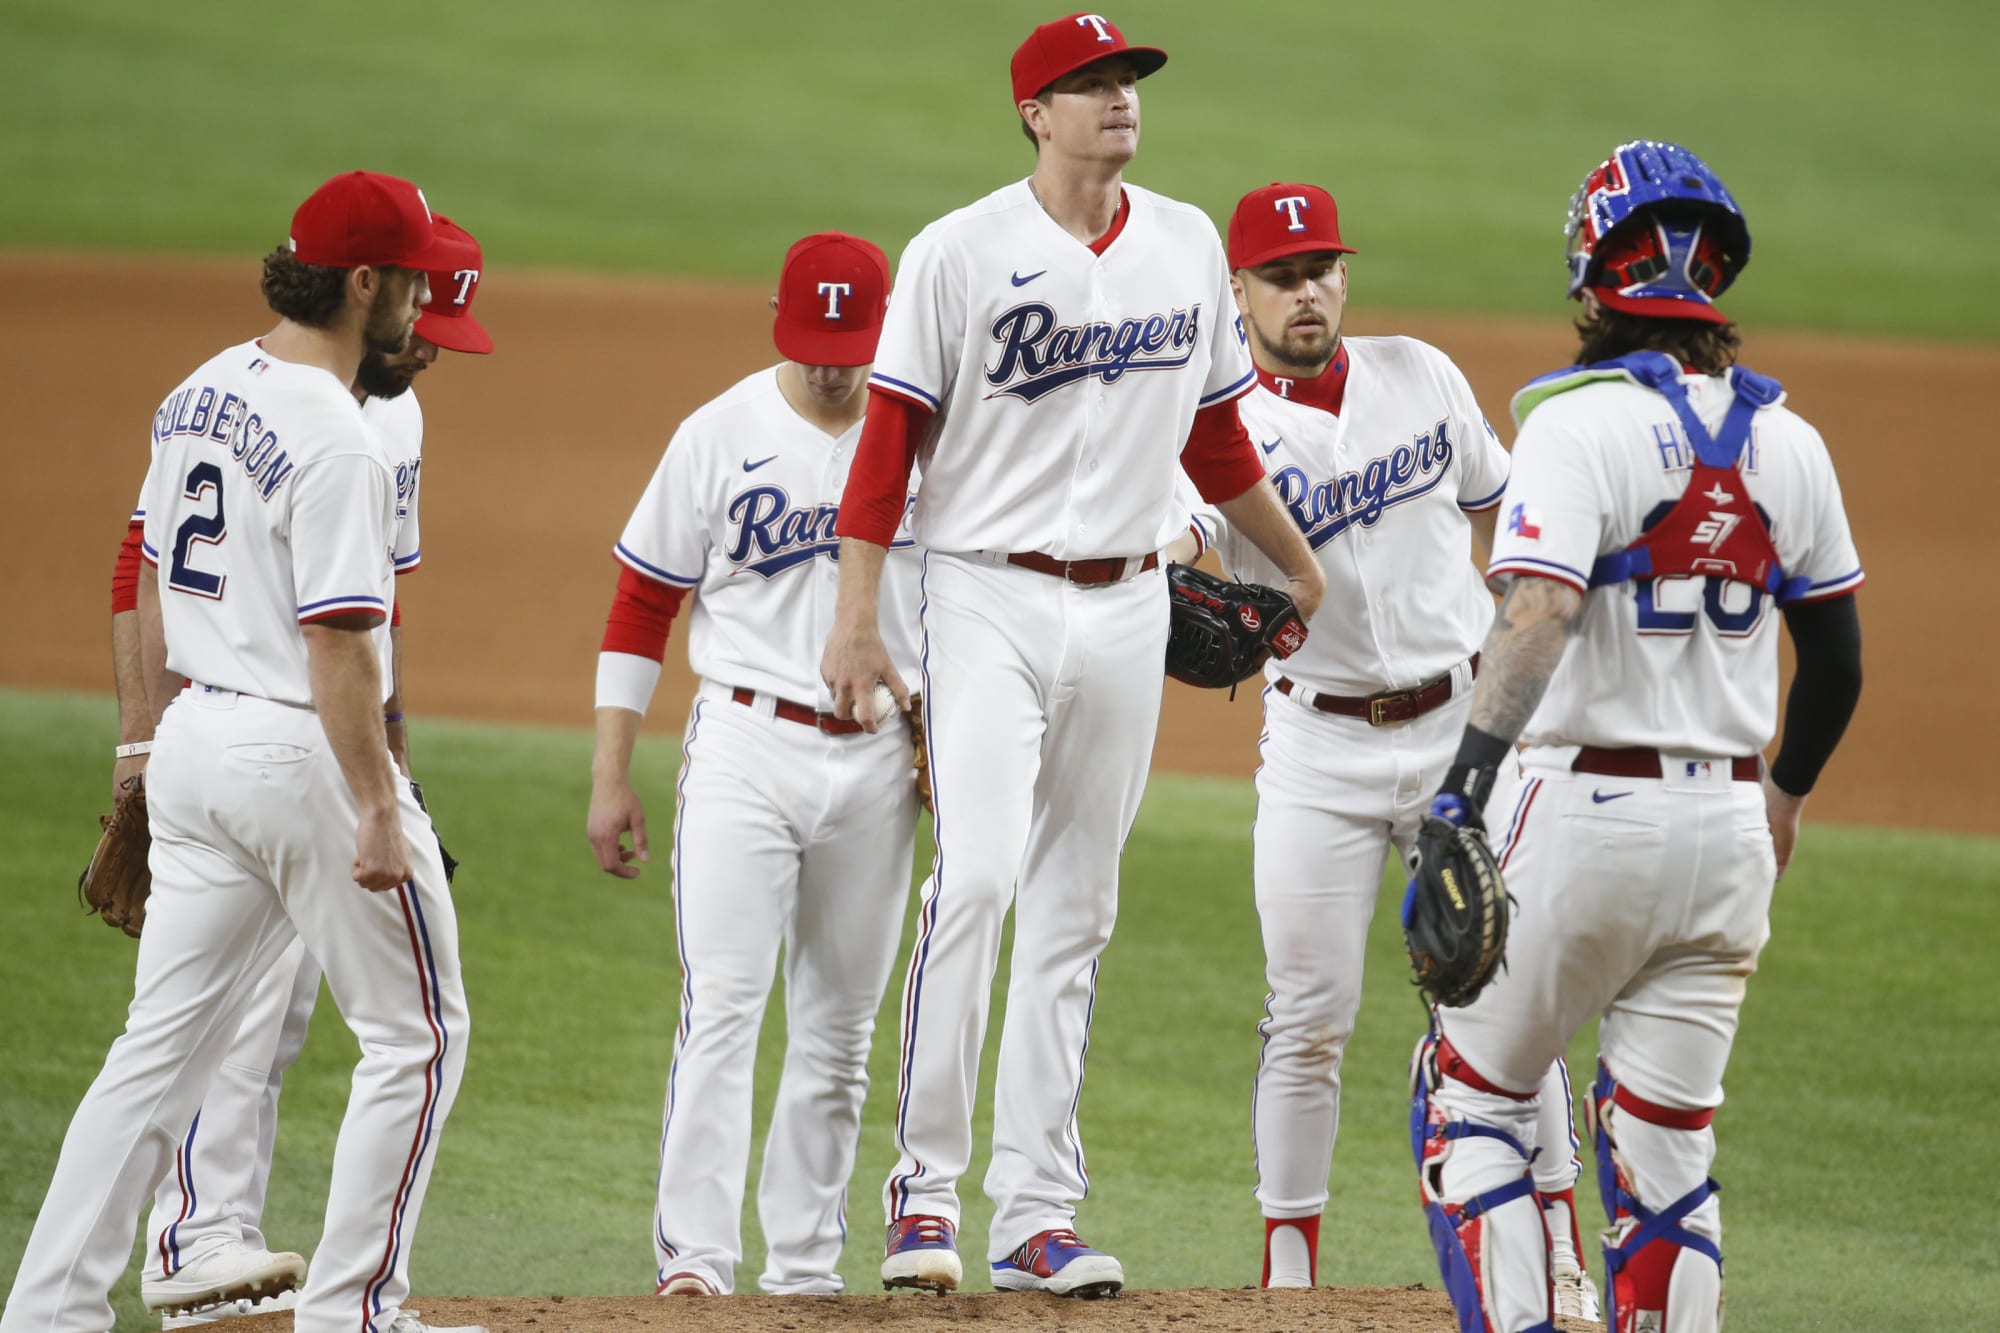 No matter what happens in A's series, Texas Rangers set for big weekend